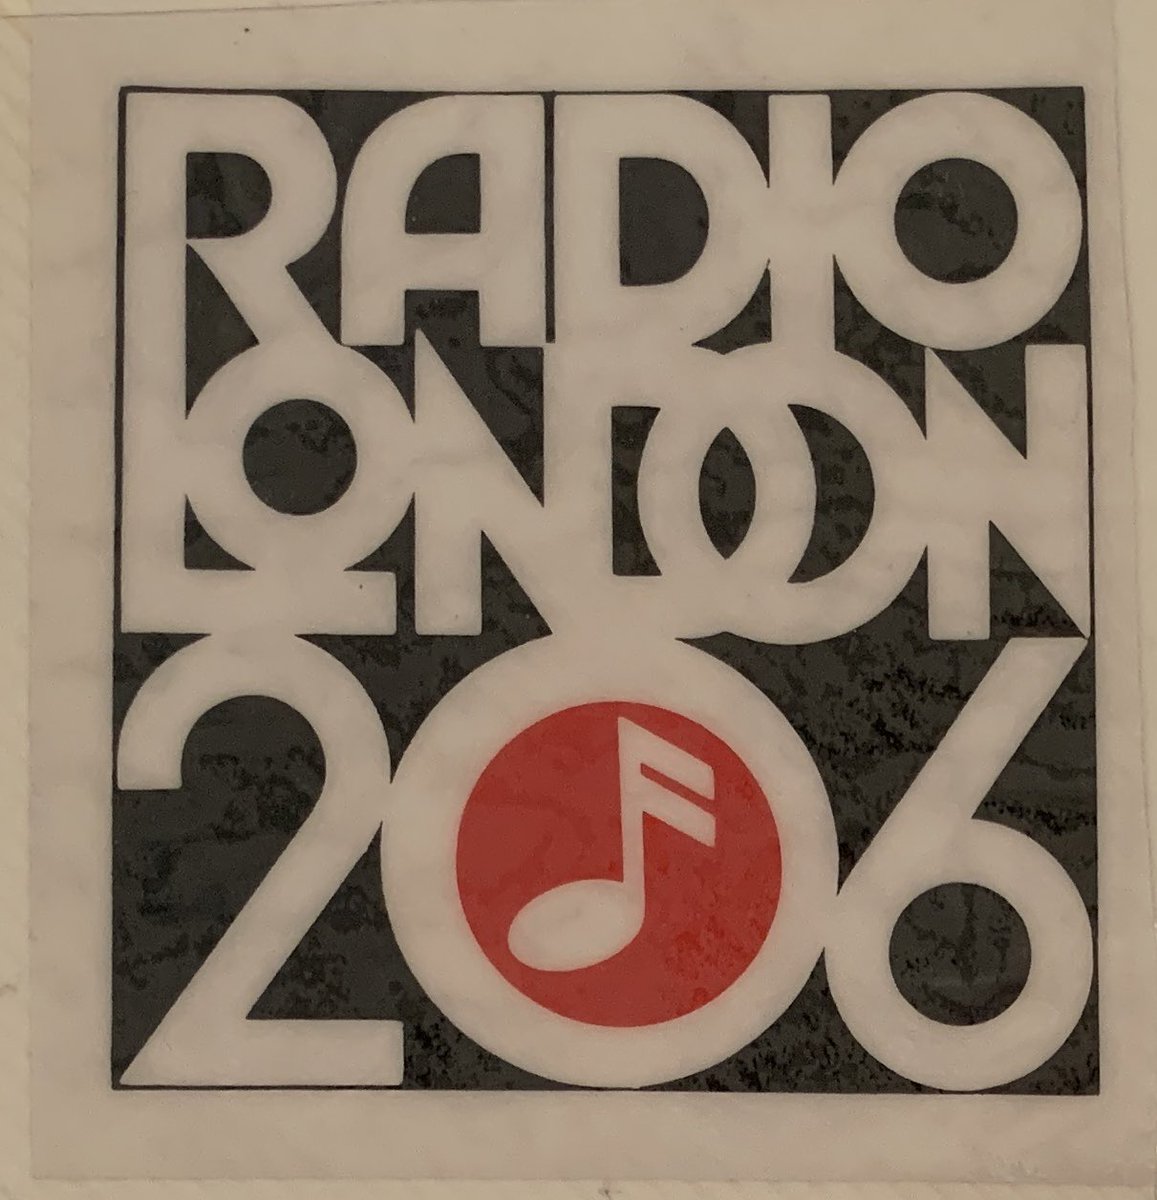 First up, a reminder of what GLR replaced - the original BBC Radio London. The origins of the old station are covered by  @Radiojottings here:  http://andywalmsley.blogspot.com/2020/10/down-your-local-50-years-of-bbc-radio.html?m=1